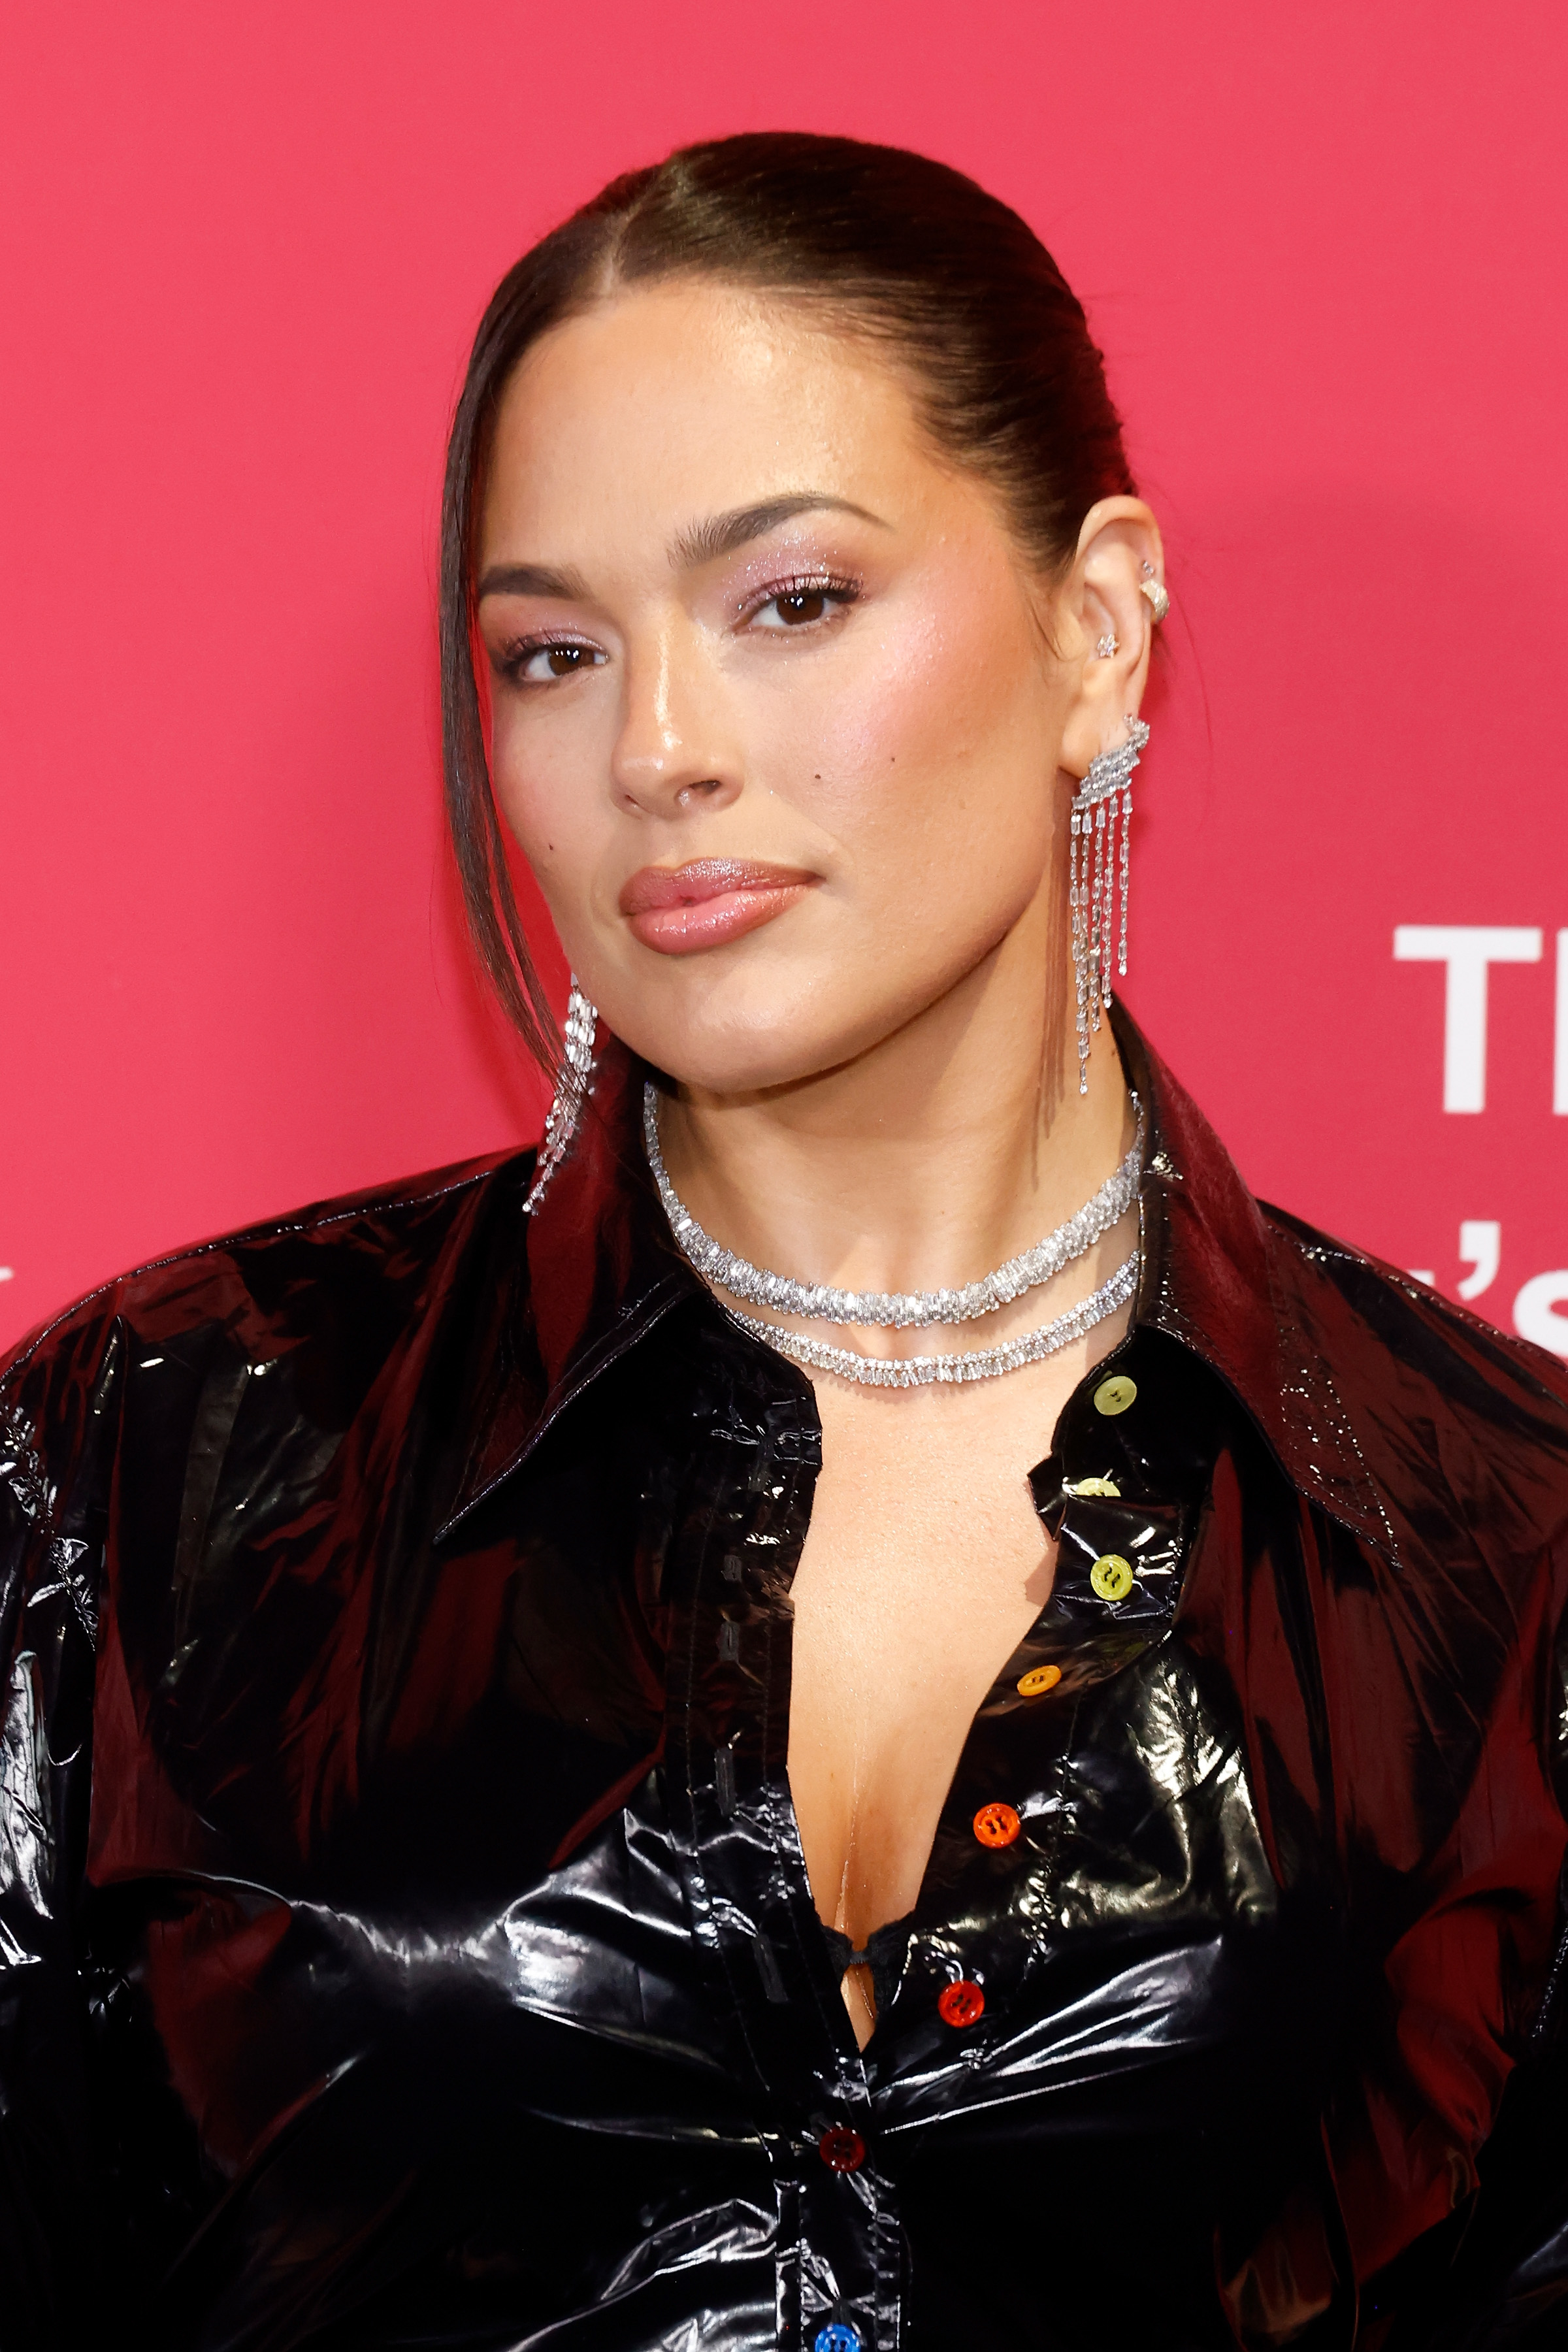 Ashley Graham wearing a glossy jacket and choker with dangling earrings at an event